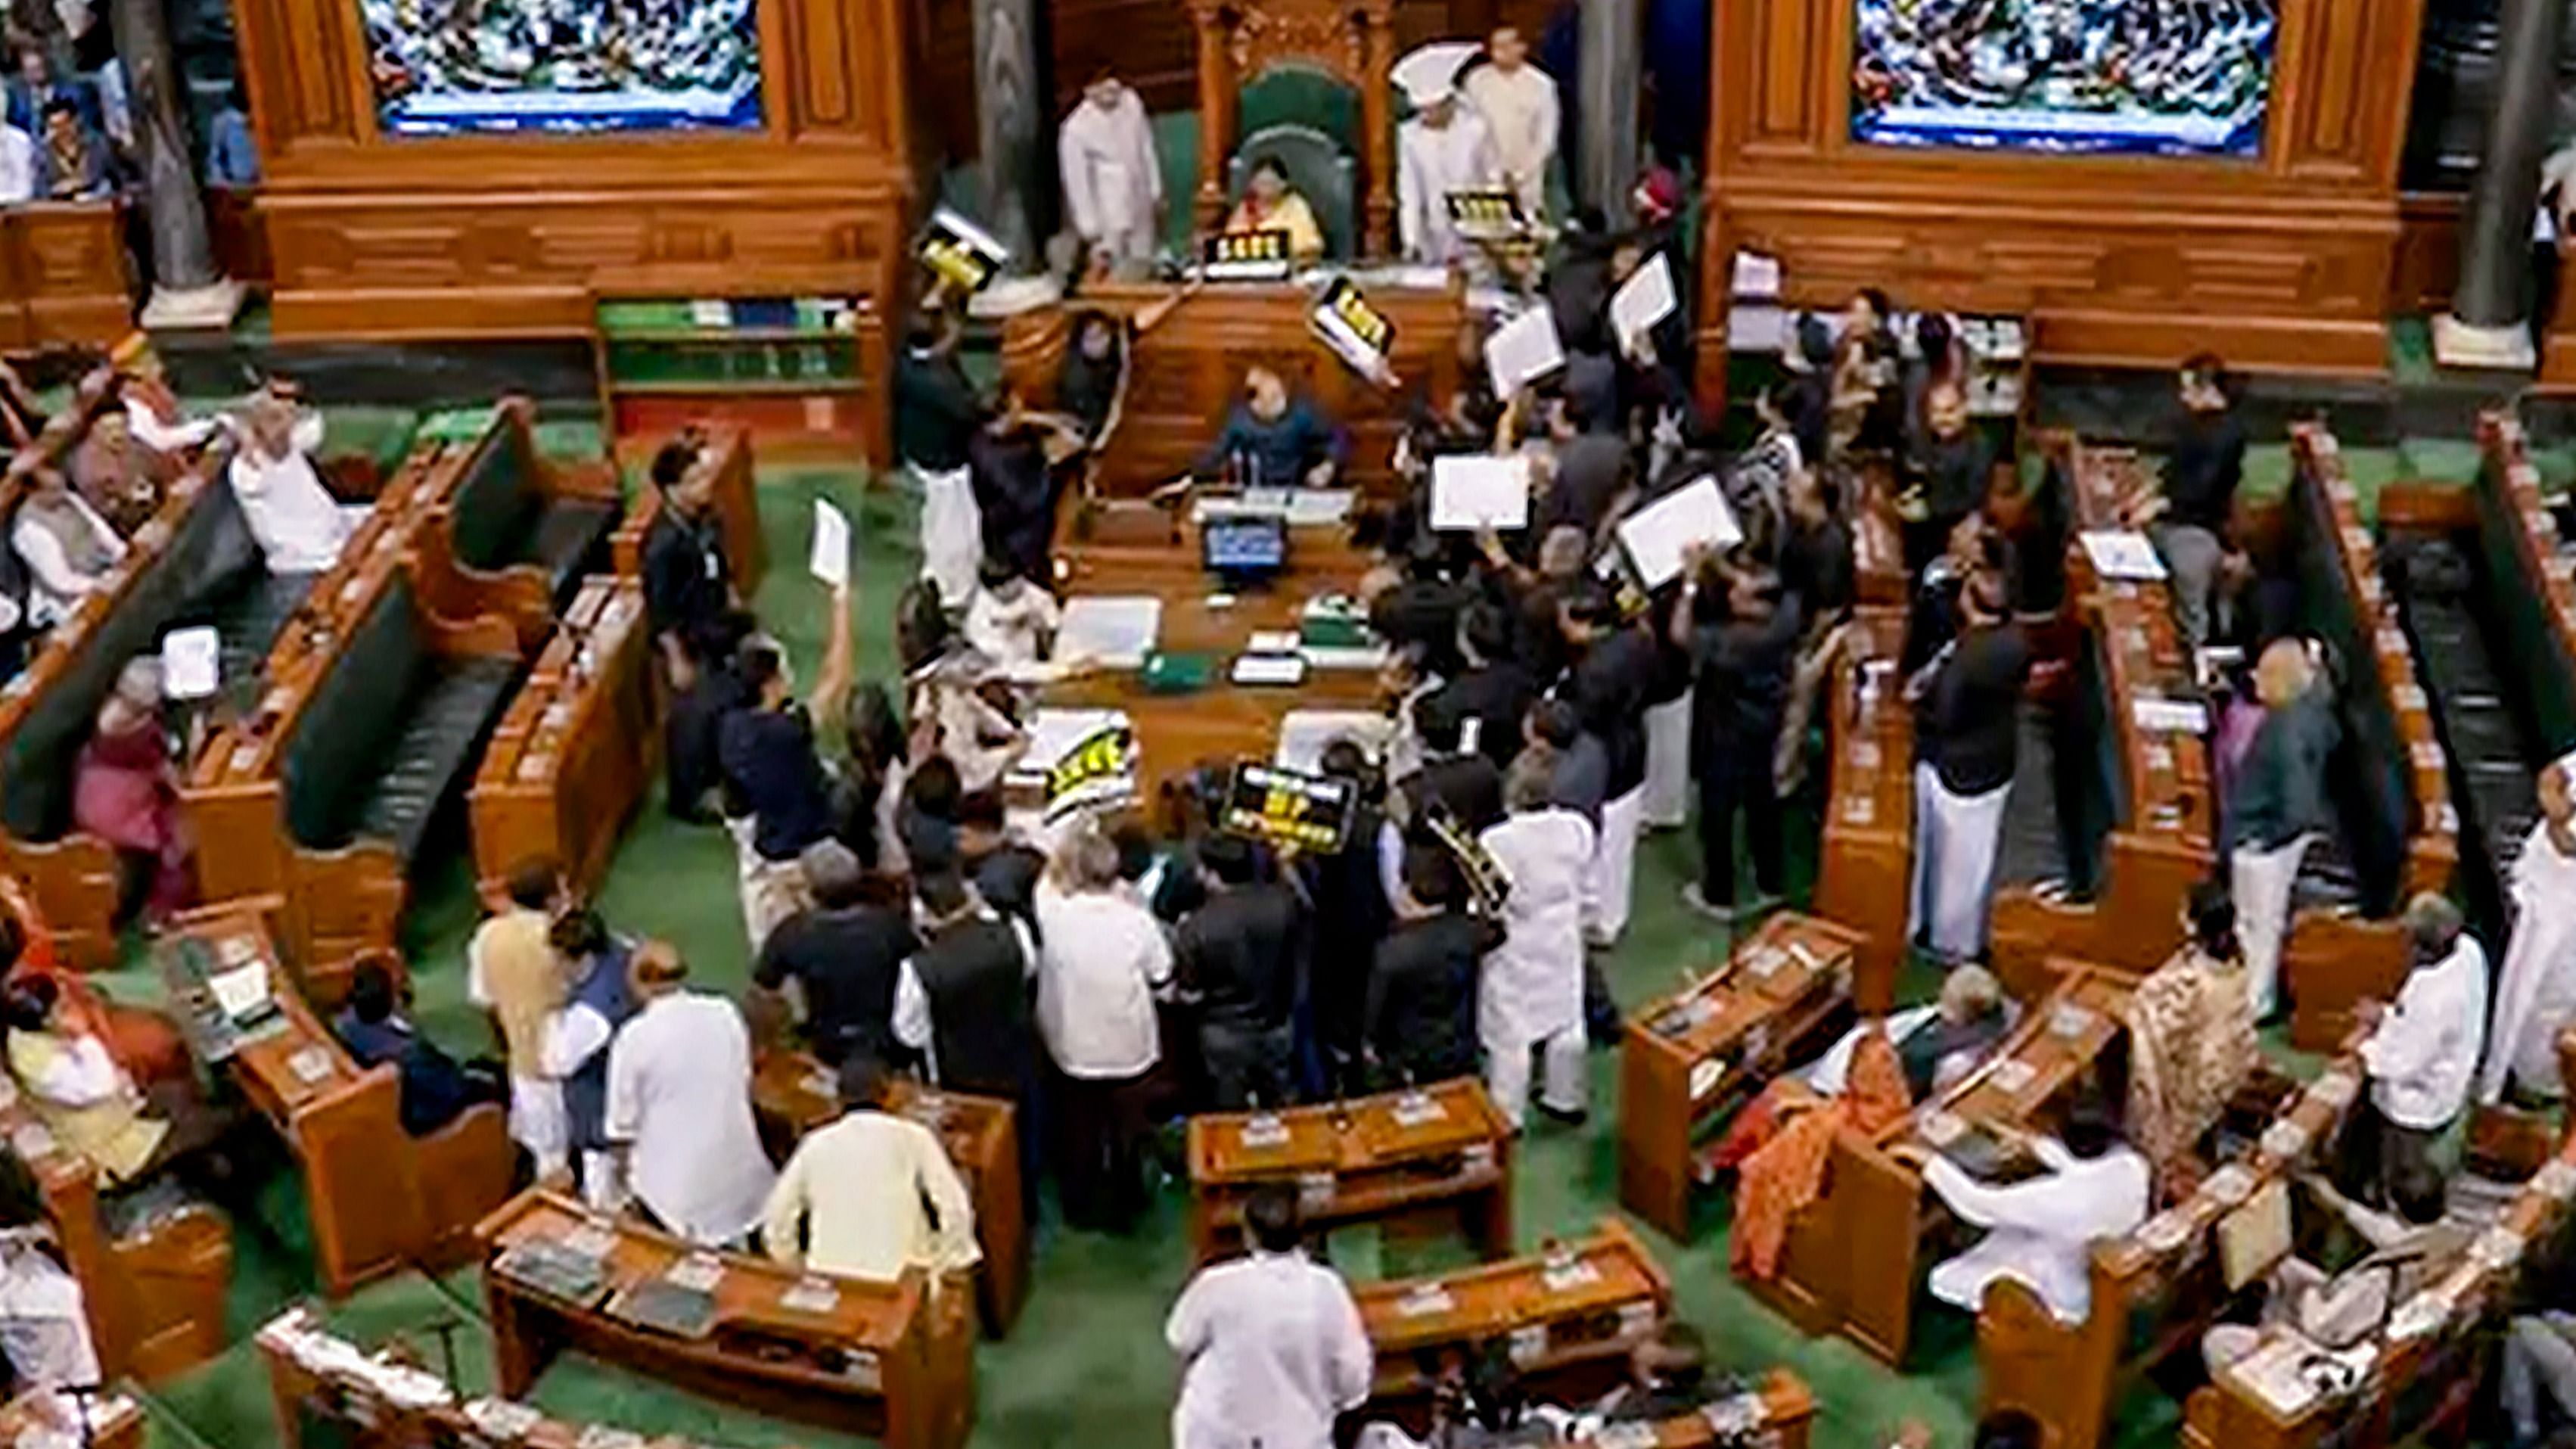  Opposition MPs, wearing black over the disqualification of Congress leader Rahul Gandhi from Lok Sabha, protest in the well of the House during Budget Session of Parliament, in New Delhi, Tuesday, March 28. Credit: PTI Photo